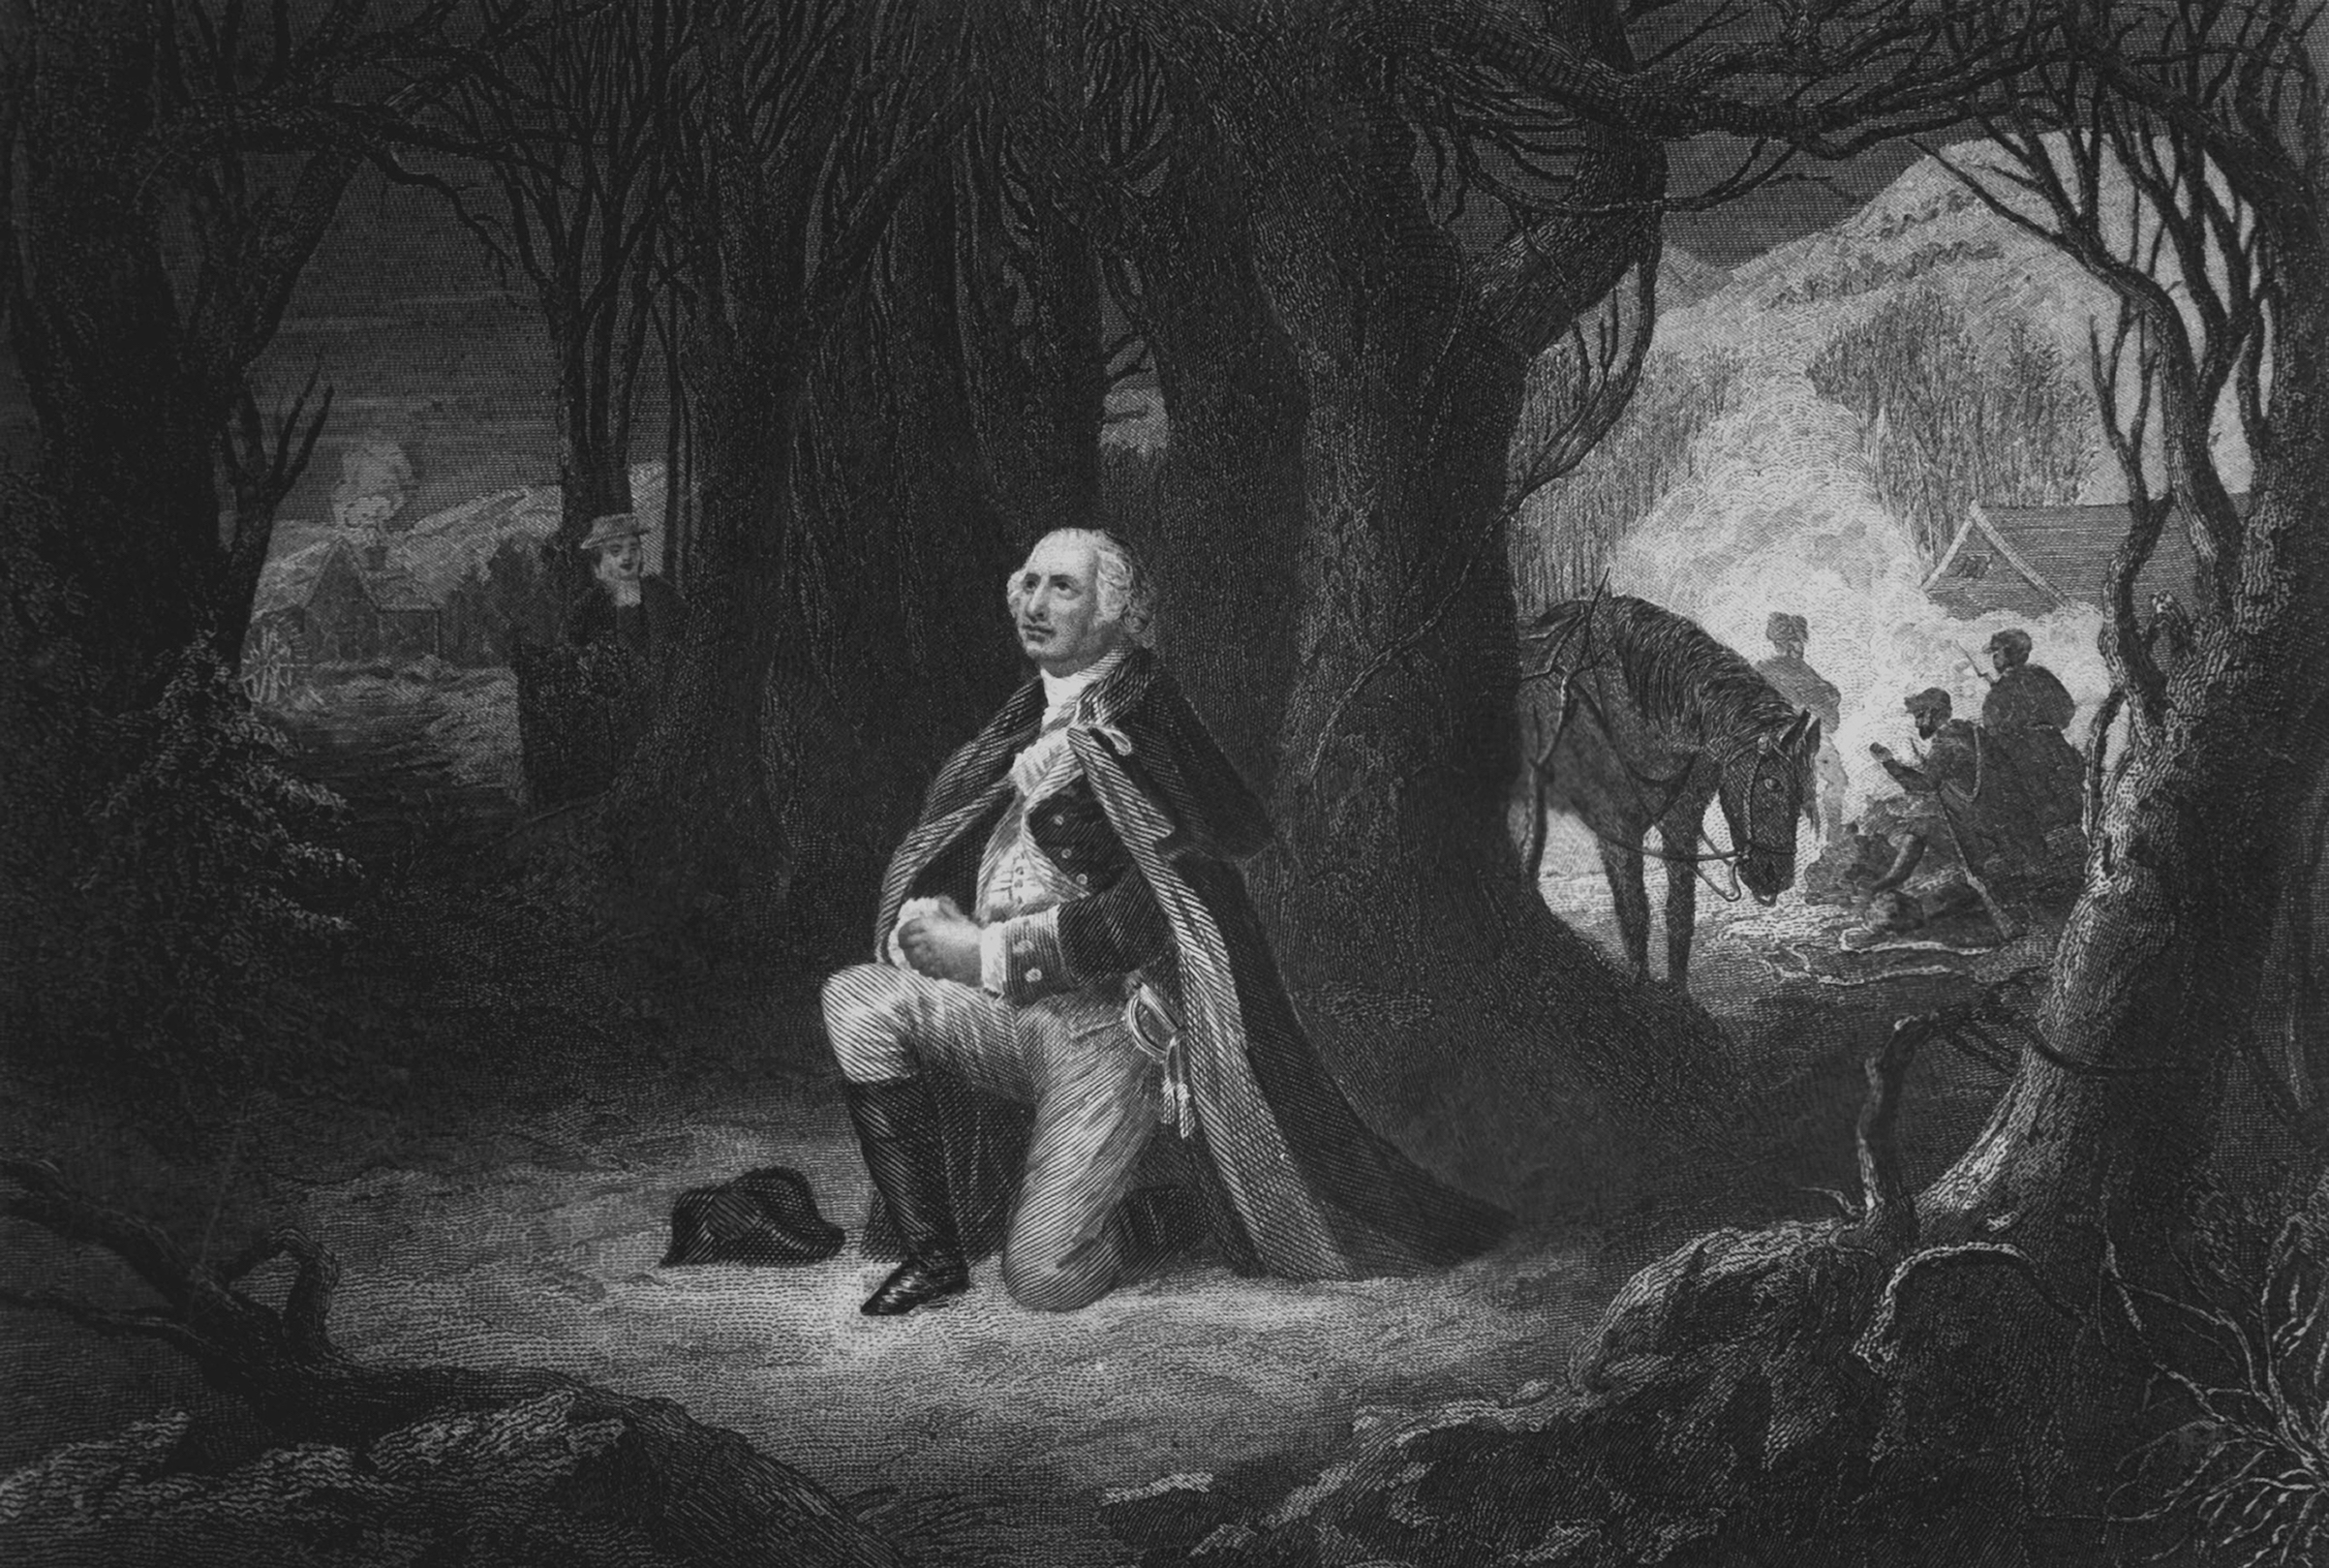 Engraving depicting General George Washington kneeling in prayer, while his soldiers camp in the background, at Valley Forge, Pennsylvania, during the winter of 1777. Copy of engraving by John McRae after a painting by Henry Brueckner, published 1866. (Interim Archives/Getty Images)